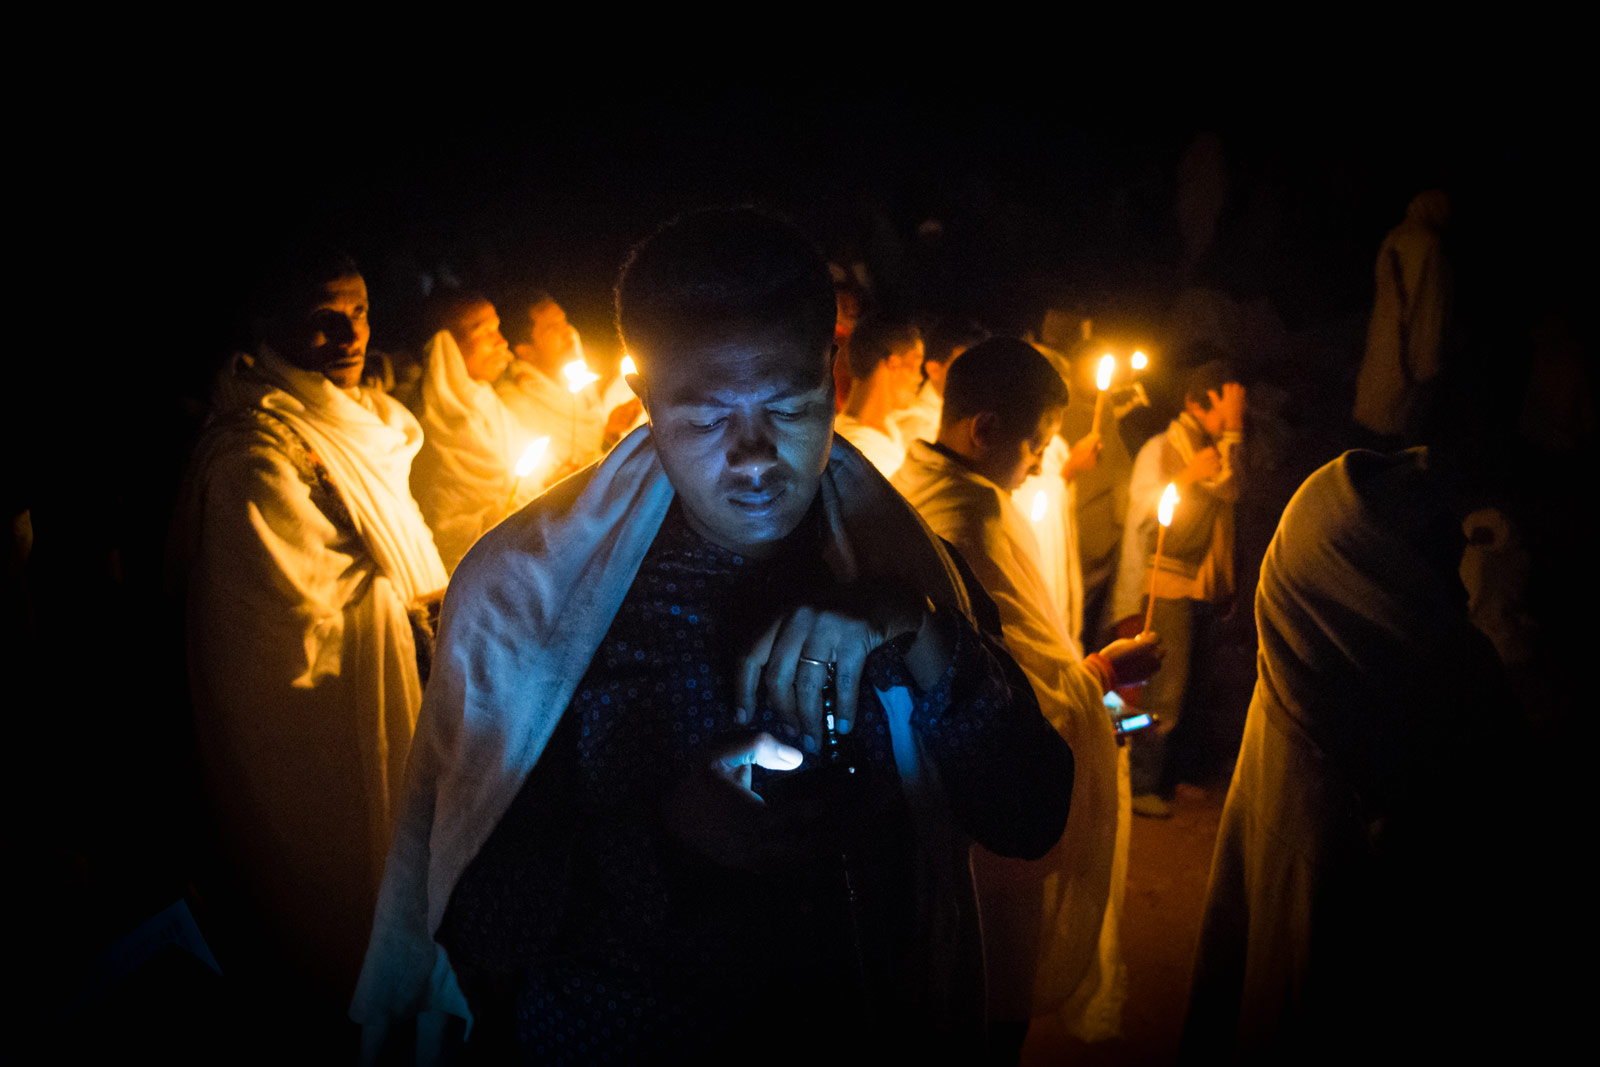 Surrounded by candlelight, a pilgrim is lit by the light of his phone in Lalibela, Ethiopia